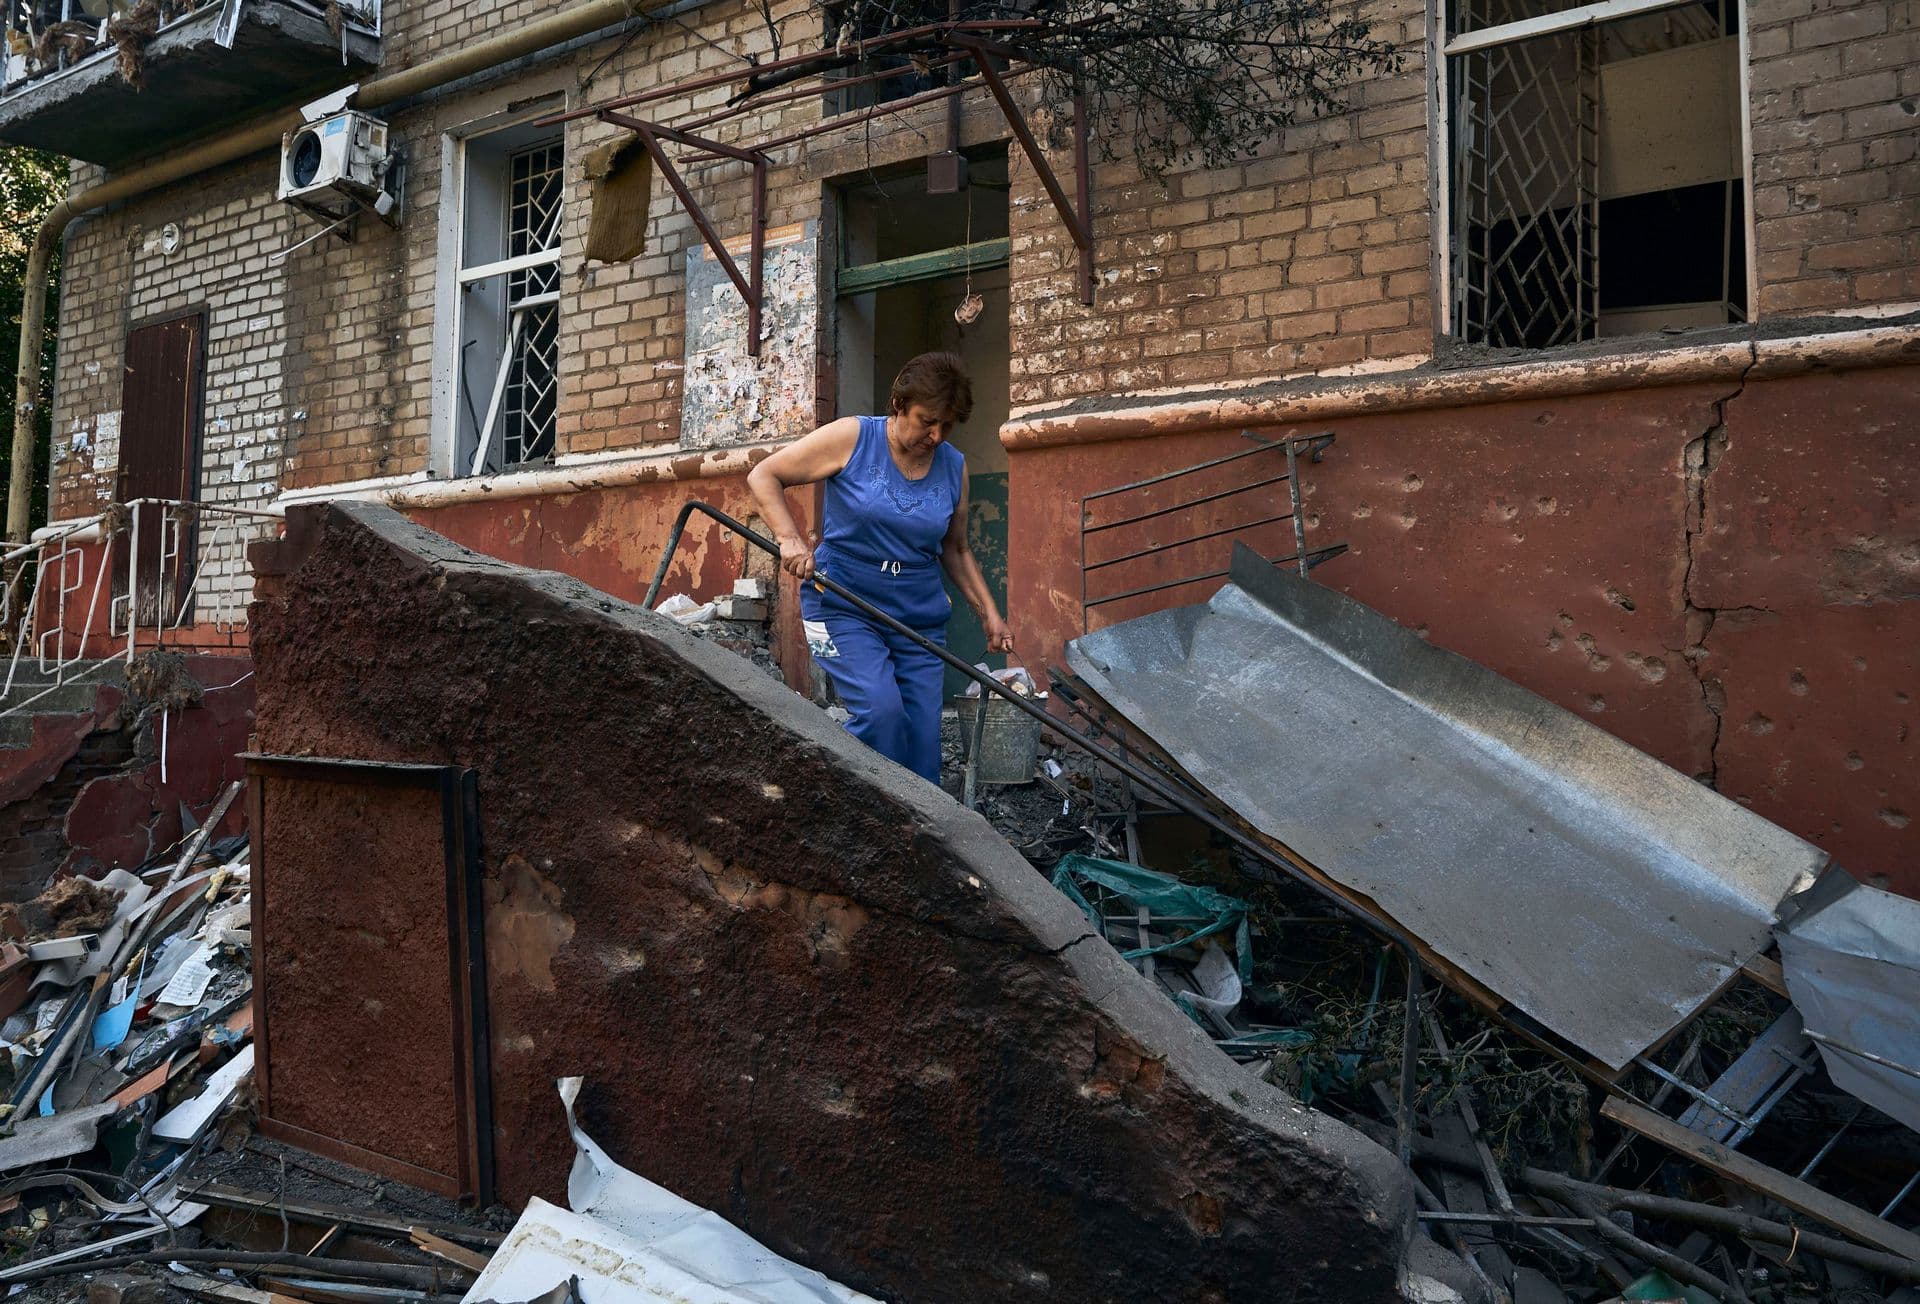 A woman cleans up debris in front of a residential building that was damaged after a Russian rocket attack in Kramatorsk